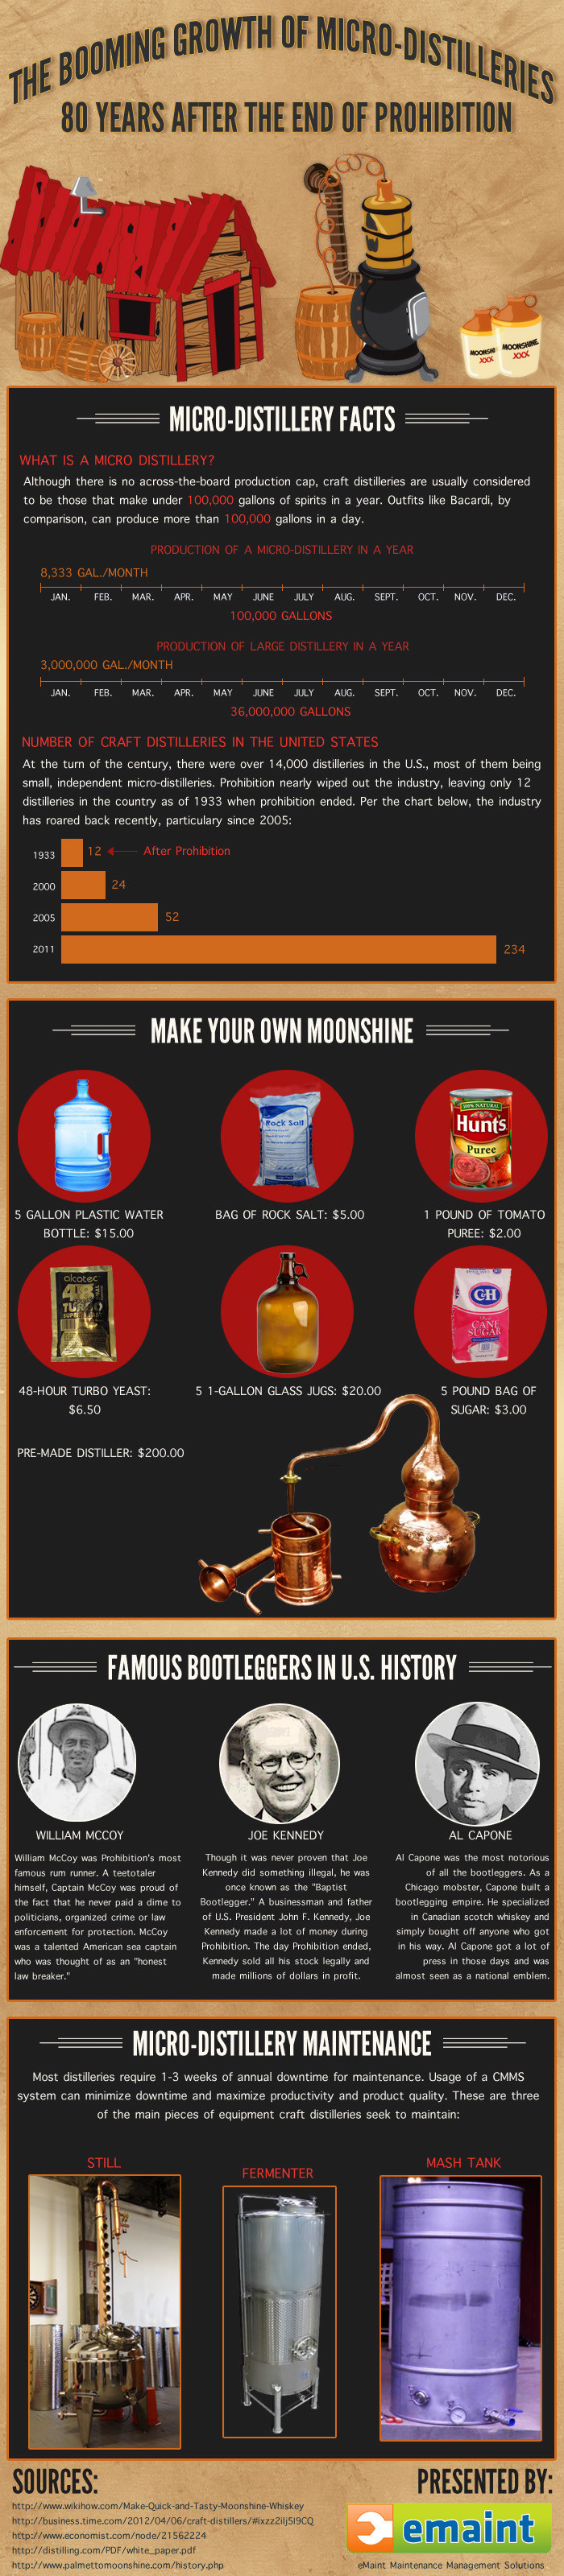 Booming growth of micro distilleries infographic